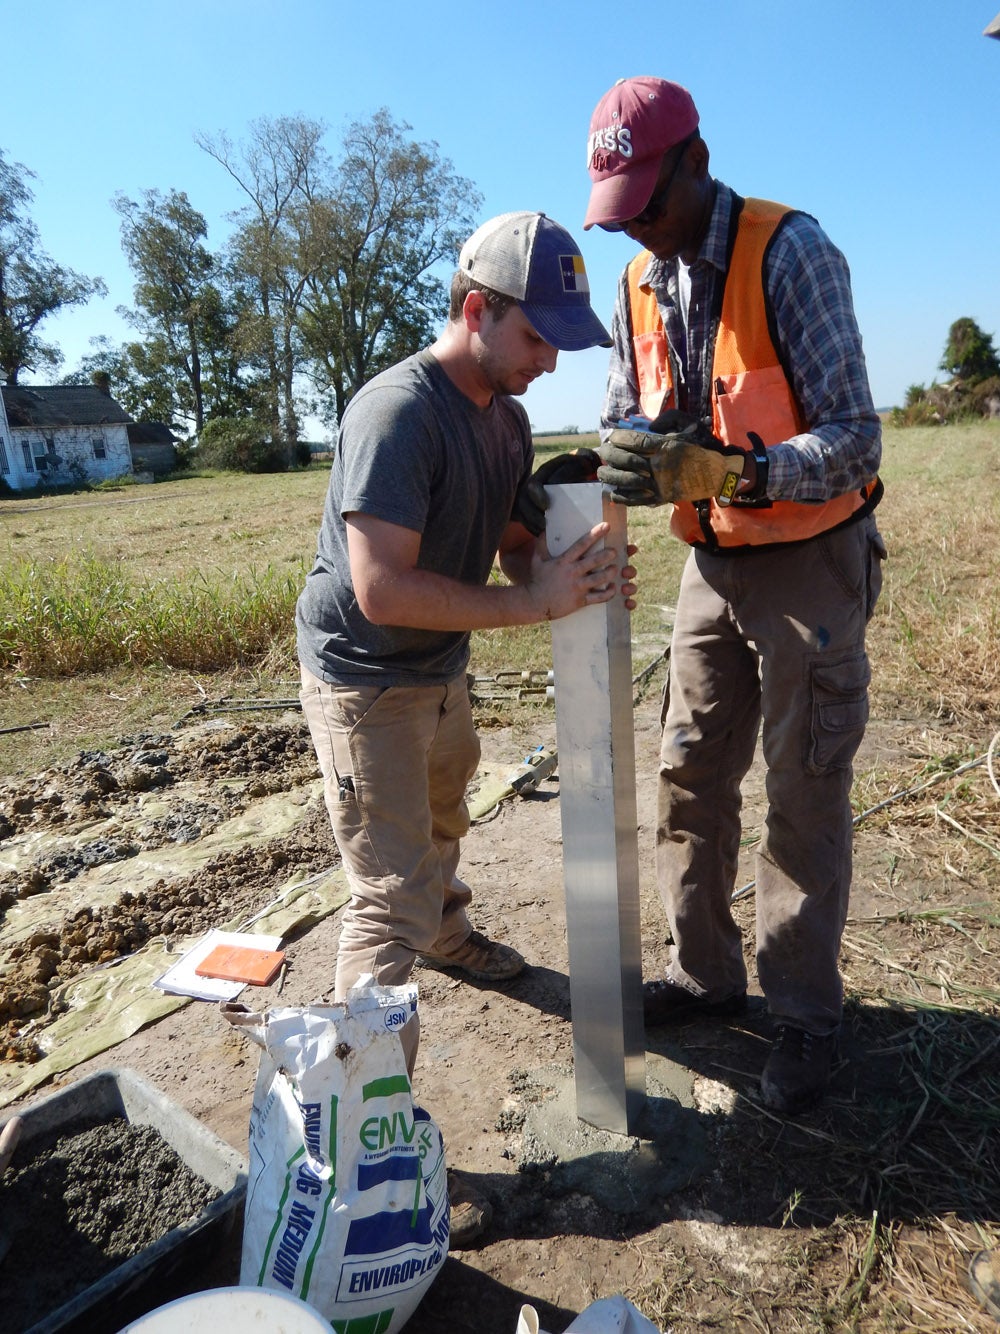 Graduate student Jon Gullet records data from soil collected in one of three counties for Manda’s RAPID grant. The team is trying to help determine what is driving the process of increased salinity in the soil in eastern North Carolina farms.